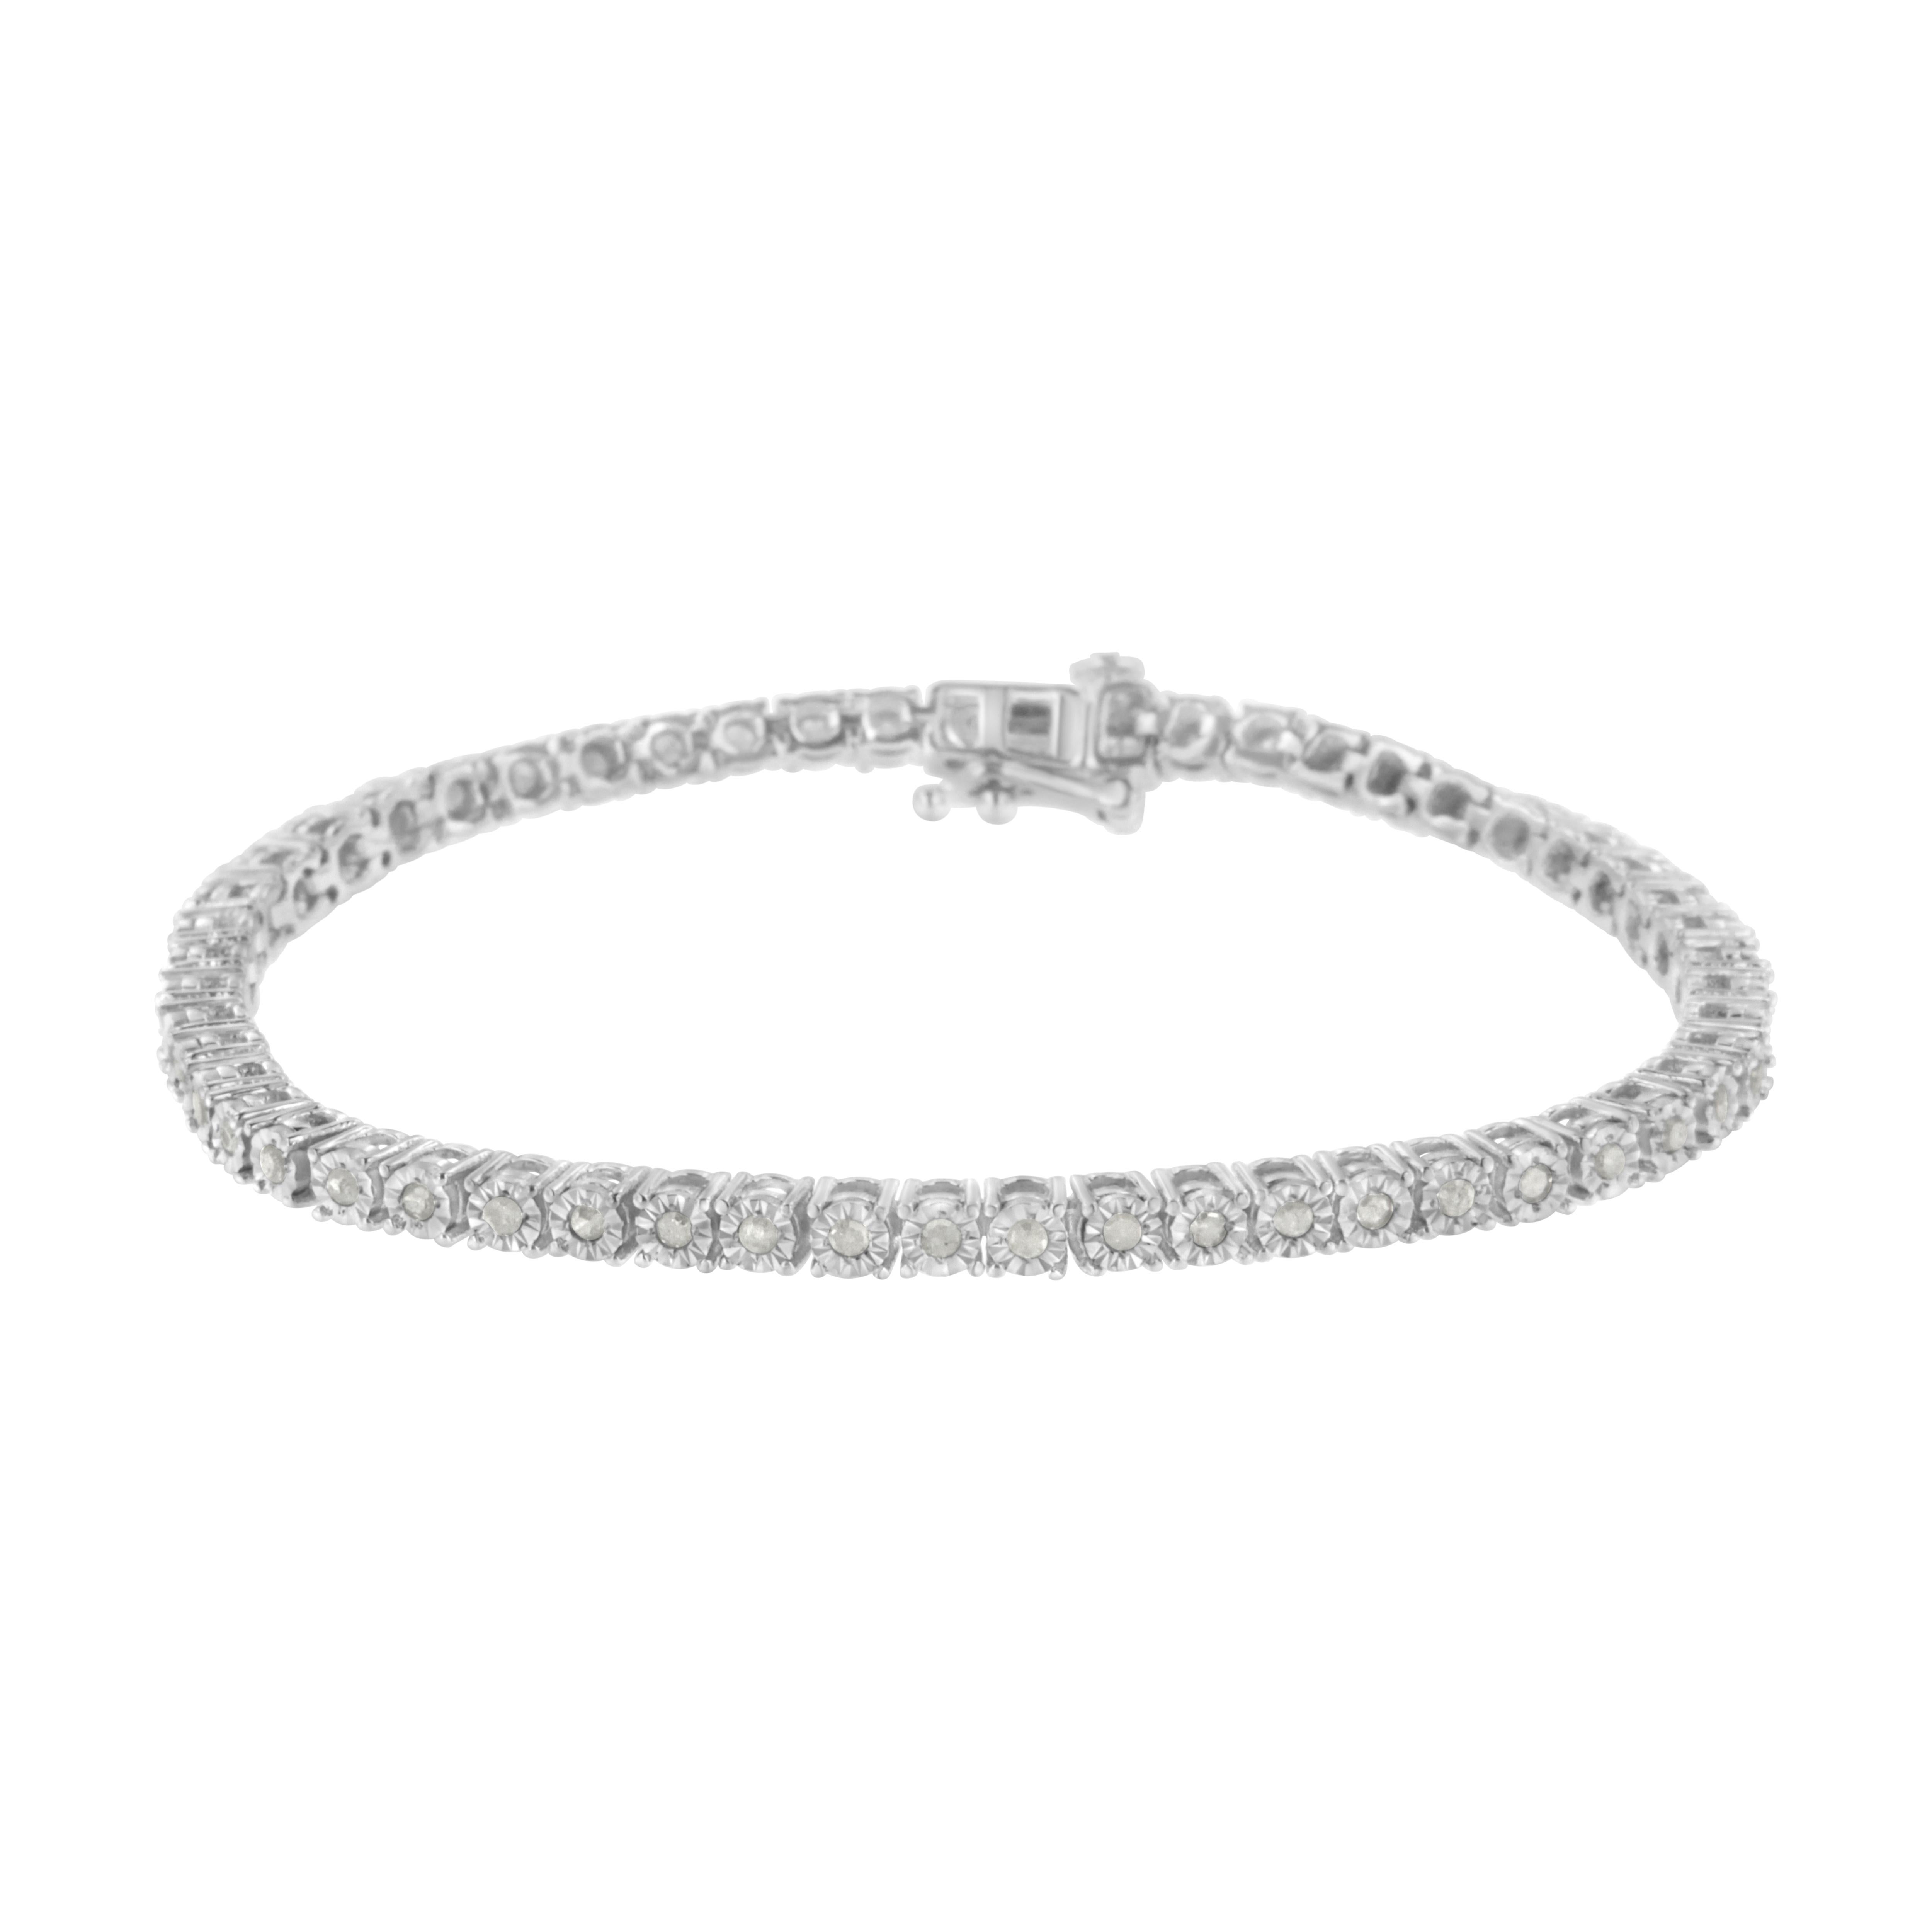 This gorgeous .925 sterling silver tennis bracelet features 1.0 carat total weight with 52 round, rose cut diamonds. The tennis bracelet has hinged links with two shapes surrounding two diamonds on each side. Rose-cut, promo quality diamonds are